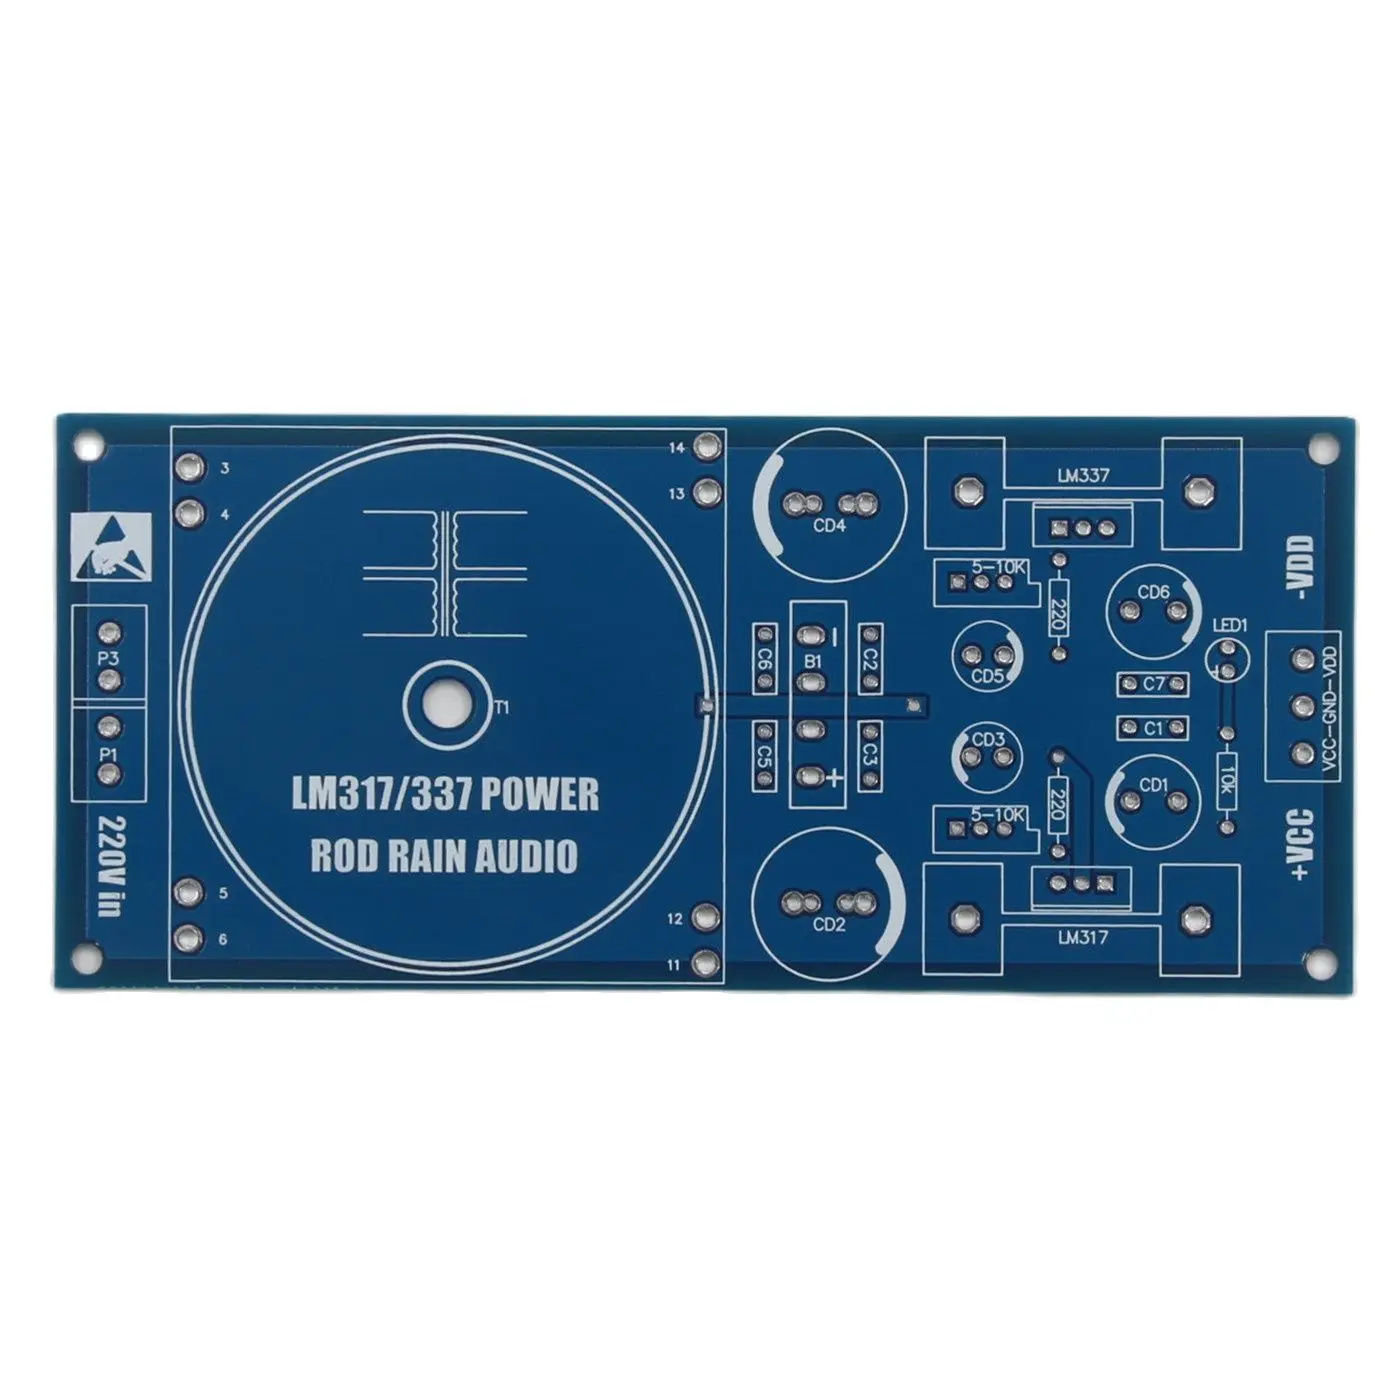 LM317 LM337 Output Dual 2.5V-24V Adjustable Regulated Power Supply Board PCB Can Be Installed Talema 15VA/25VA Transformer engraved naim hicap nac152xs two way 24v regulated power supply board